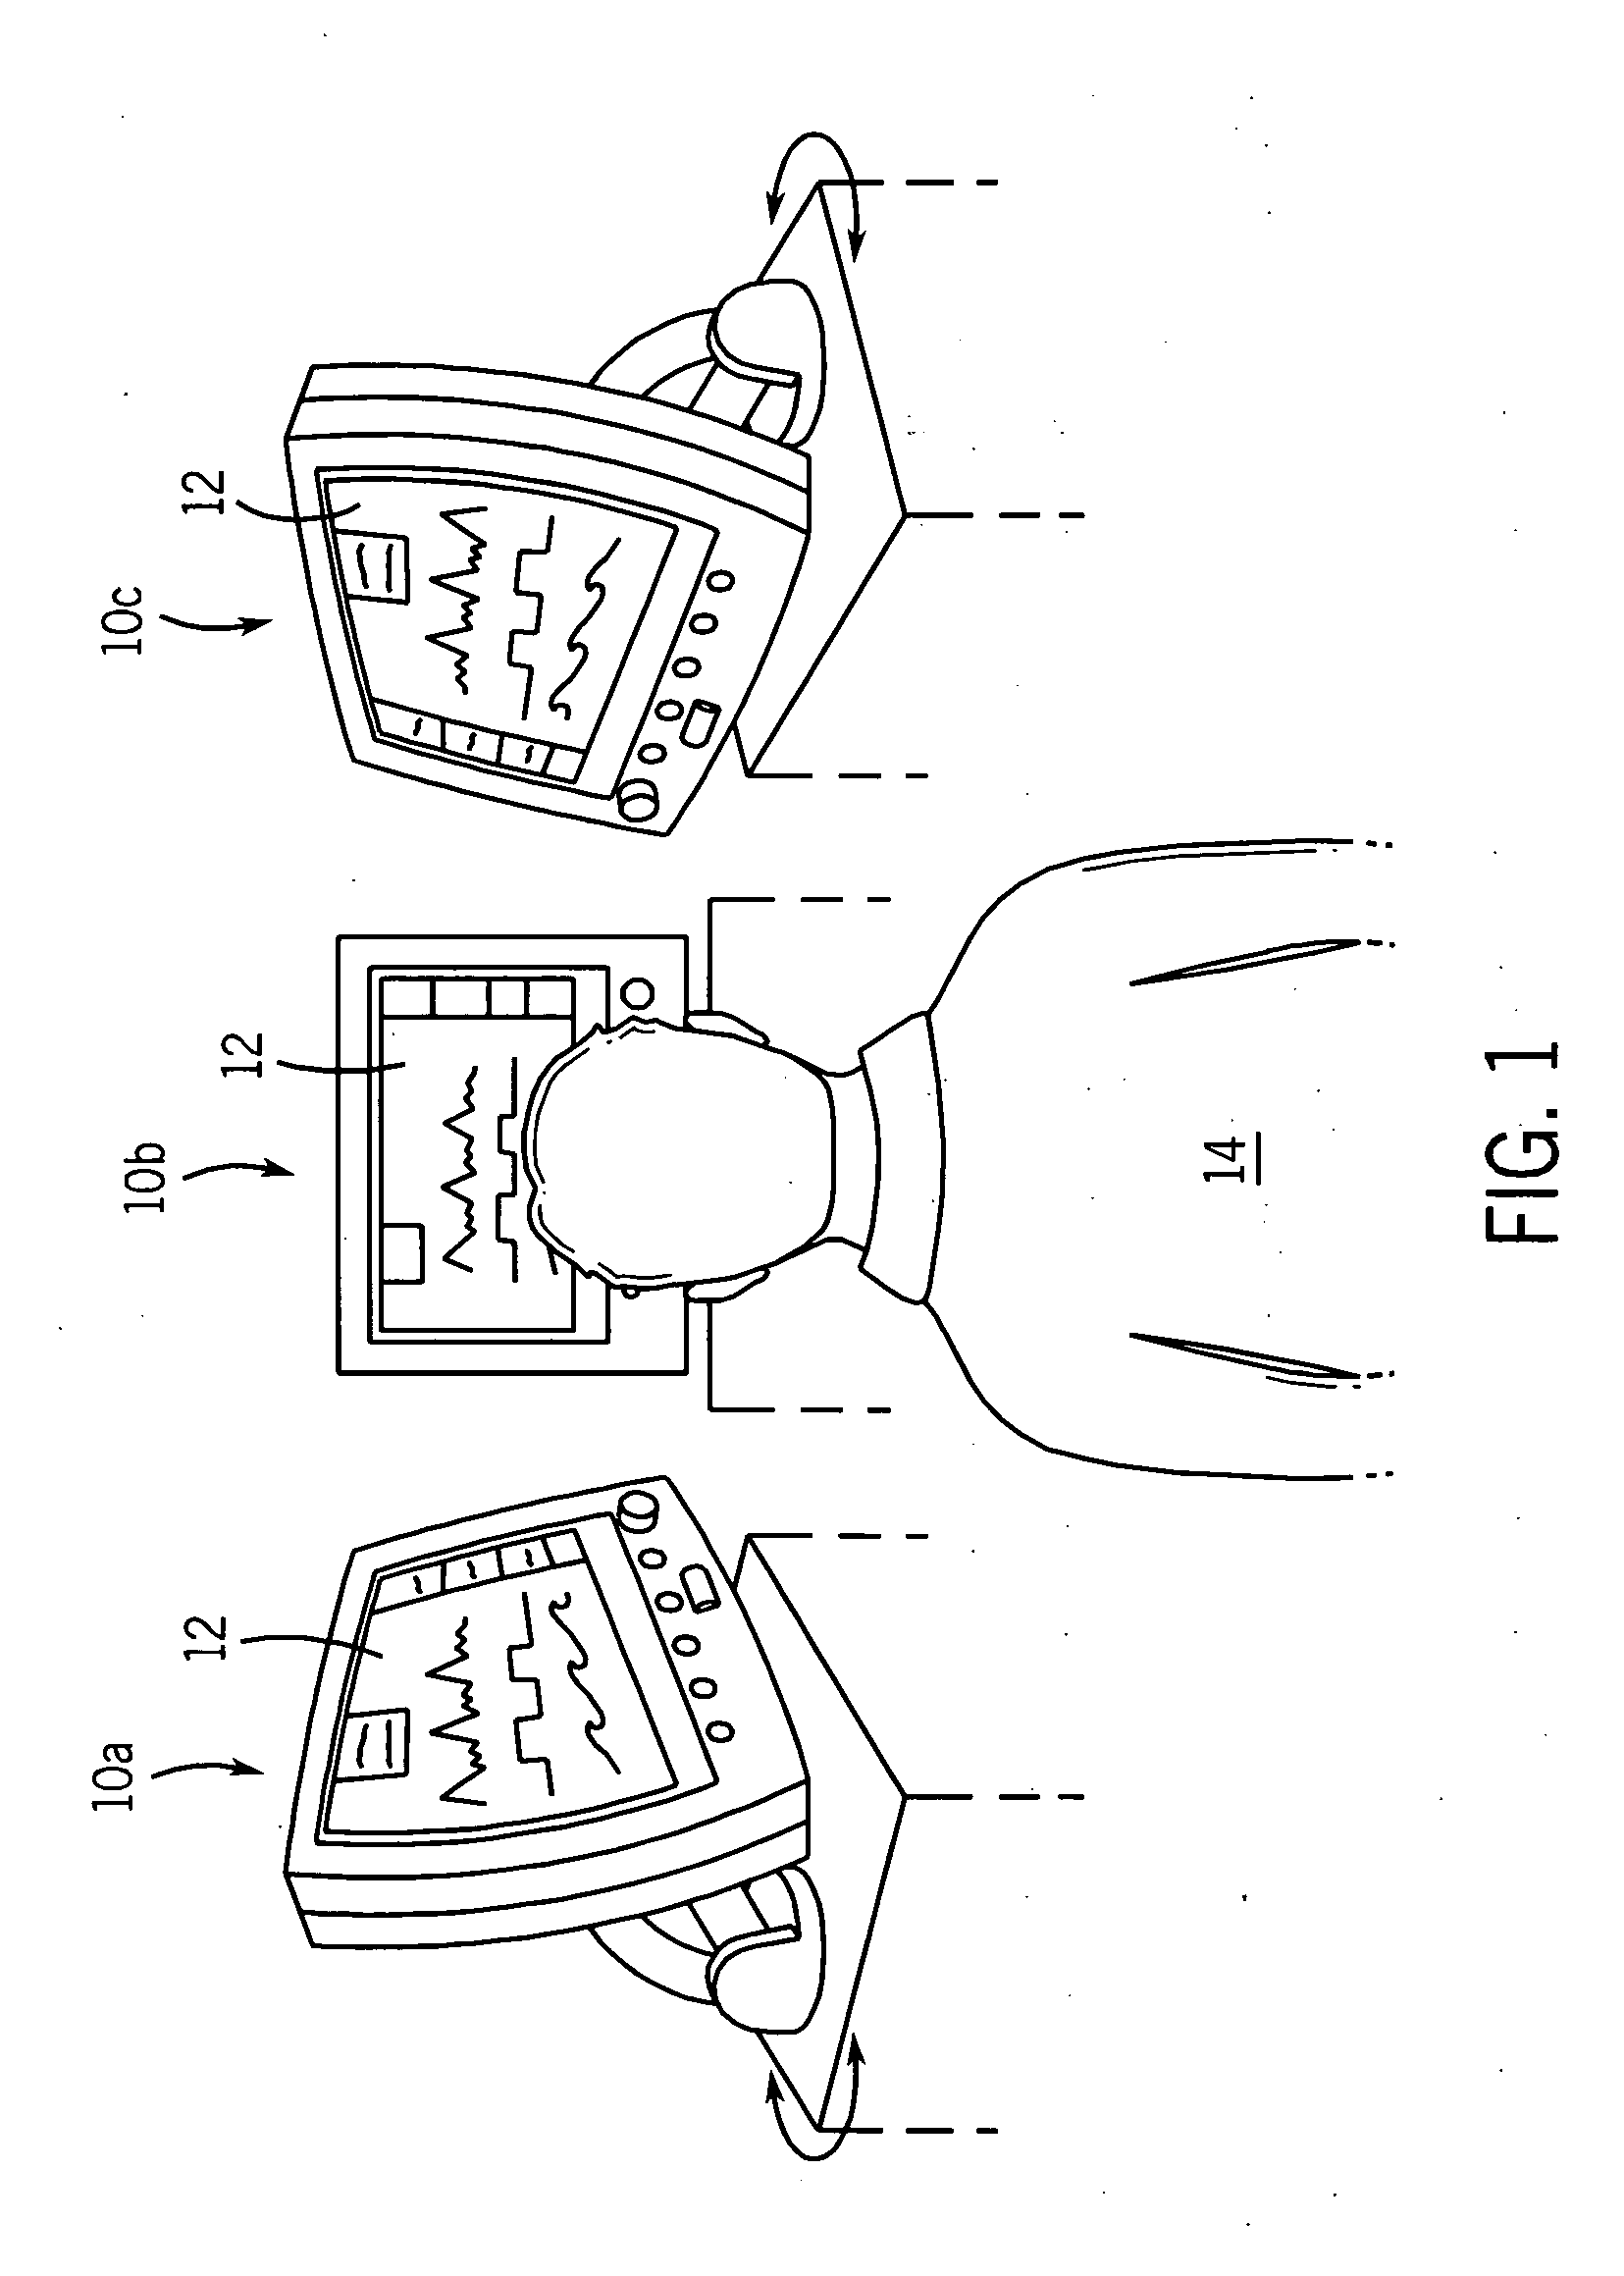 System and method for automatically adjusting medical displays